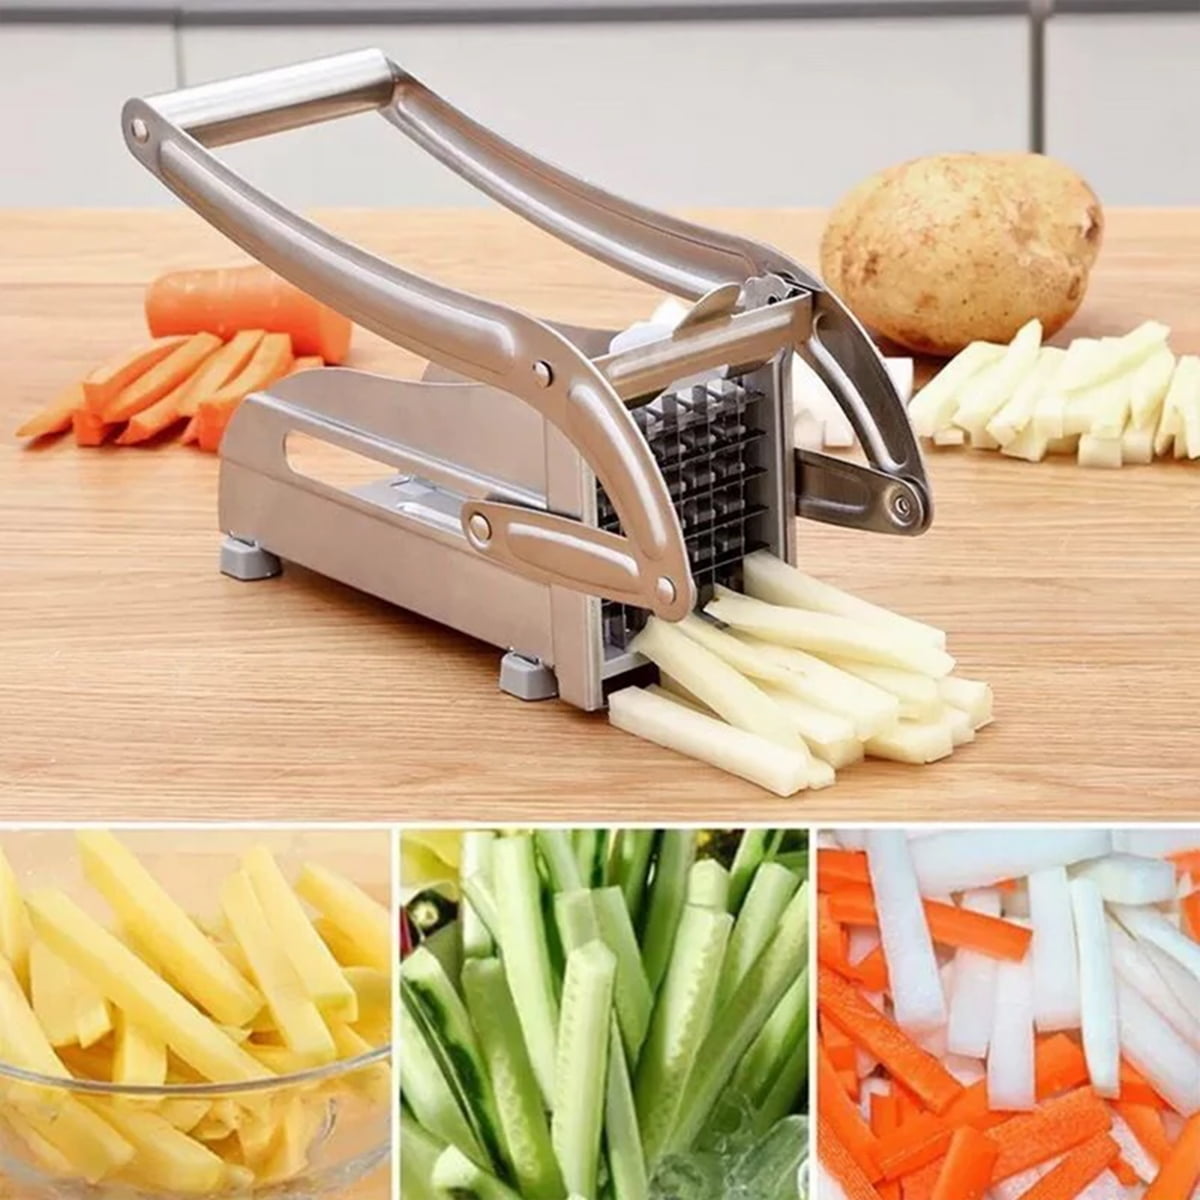 Stainless Steel Potato Fries Cutter Slicer Chopper Kitchen Cooking Tool Blade 